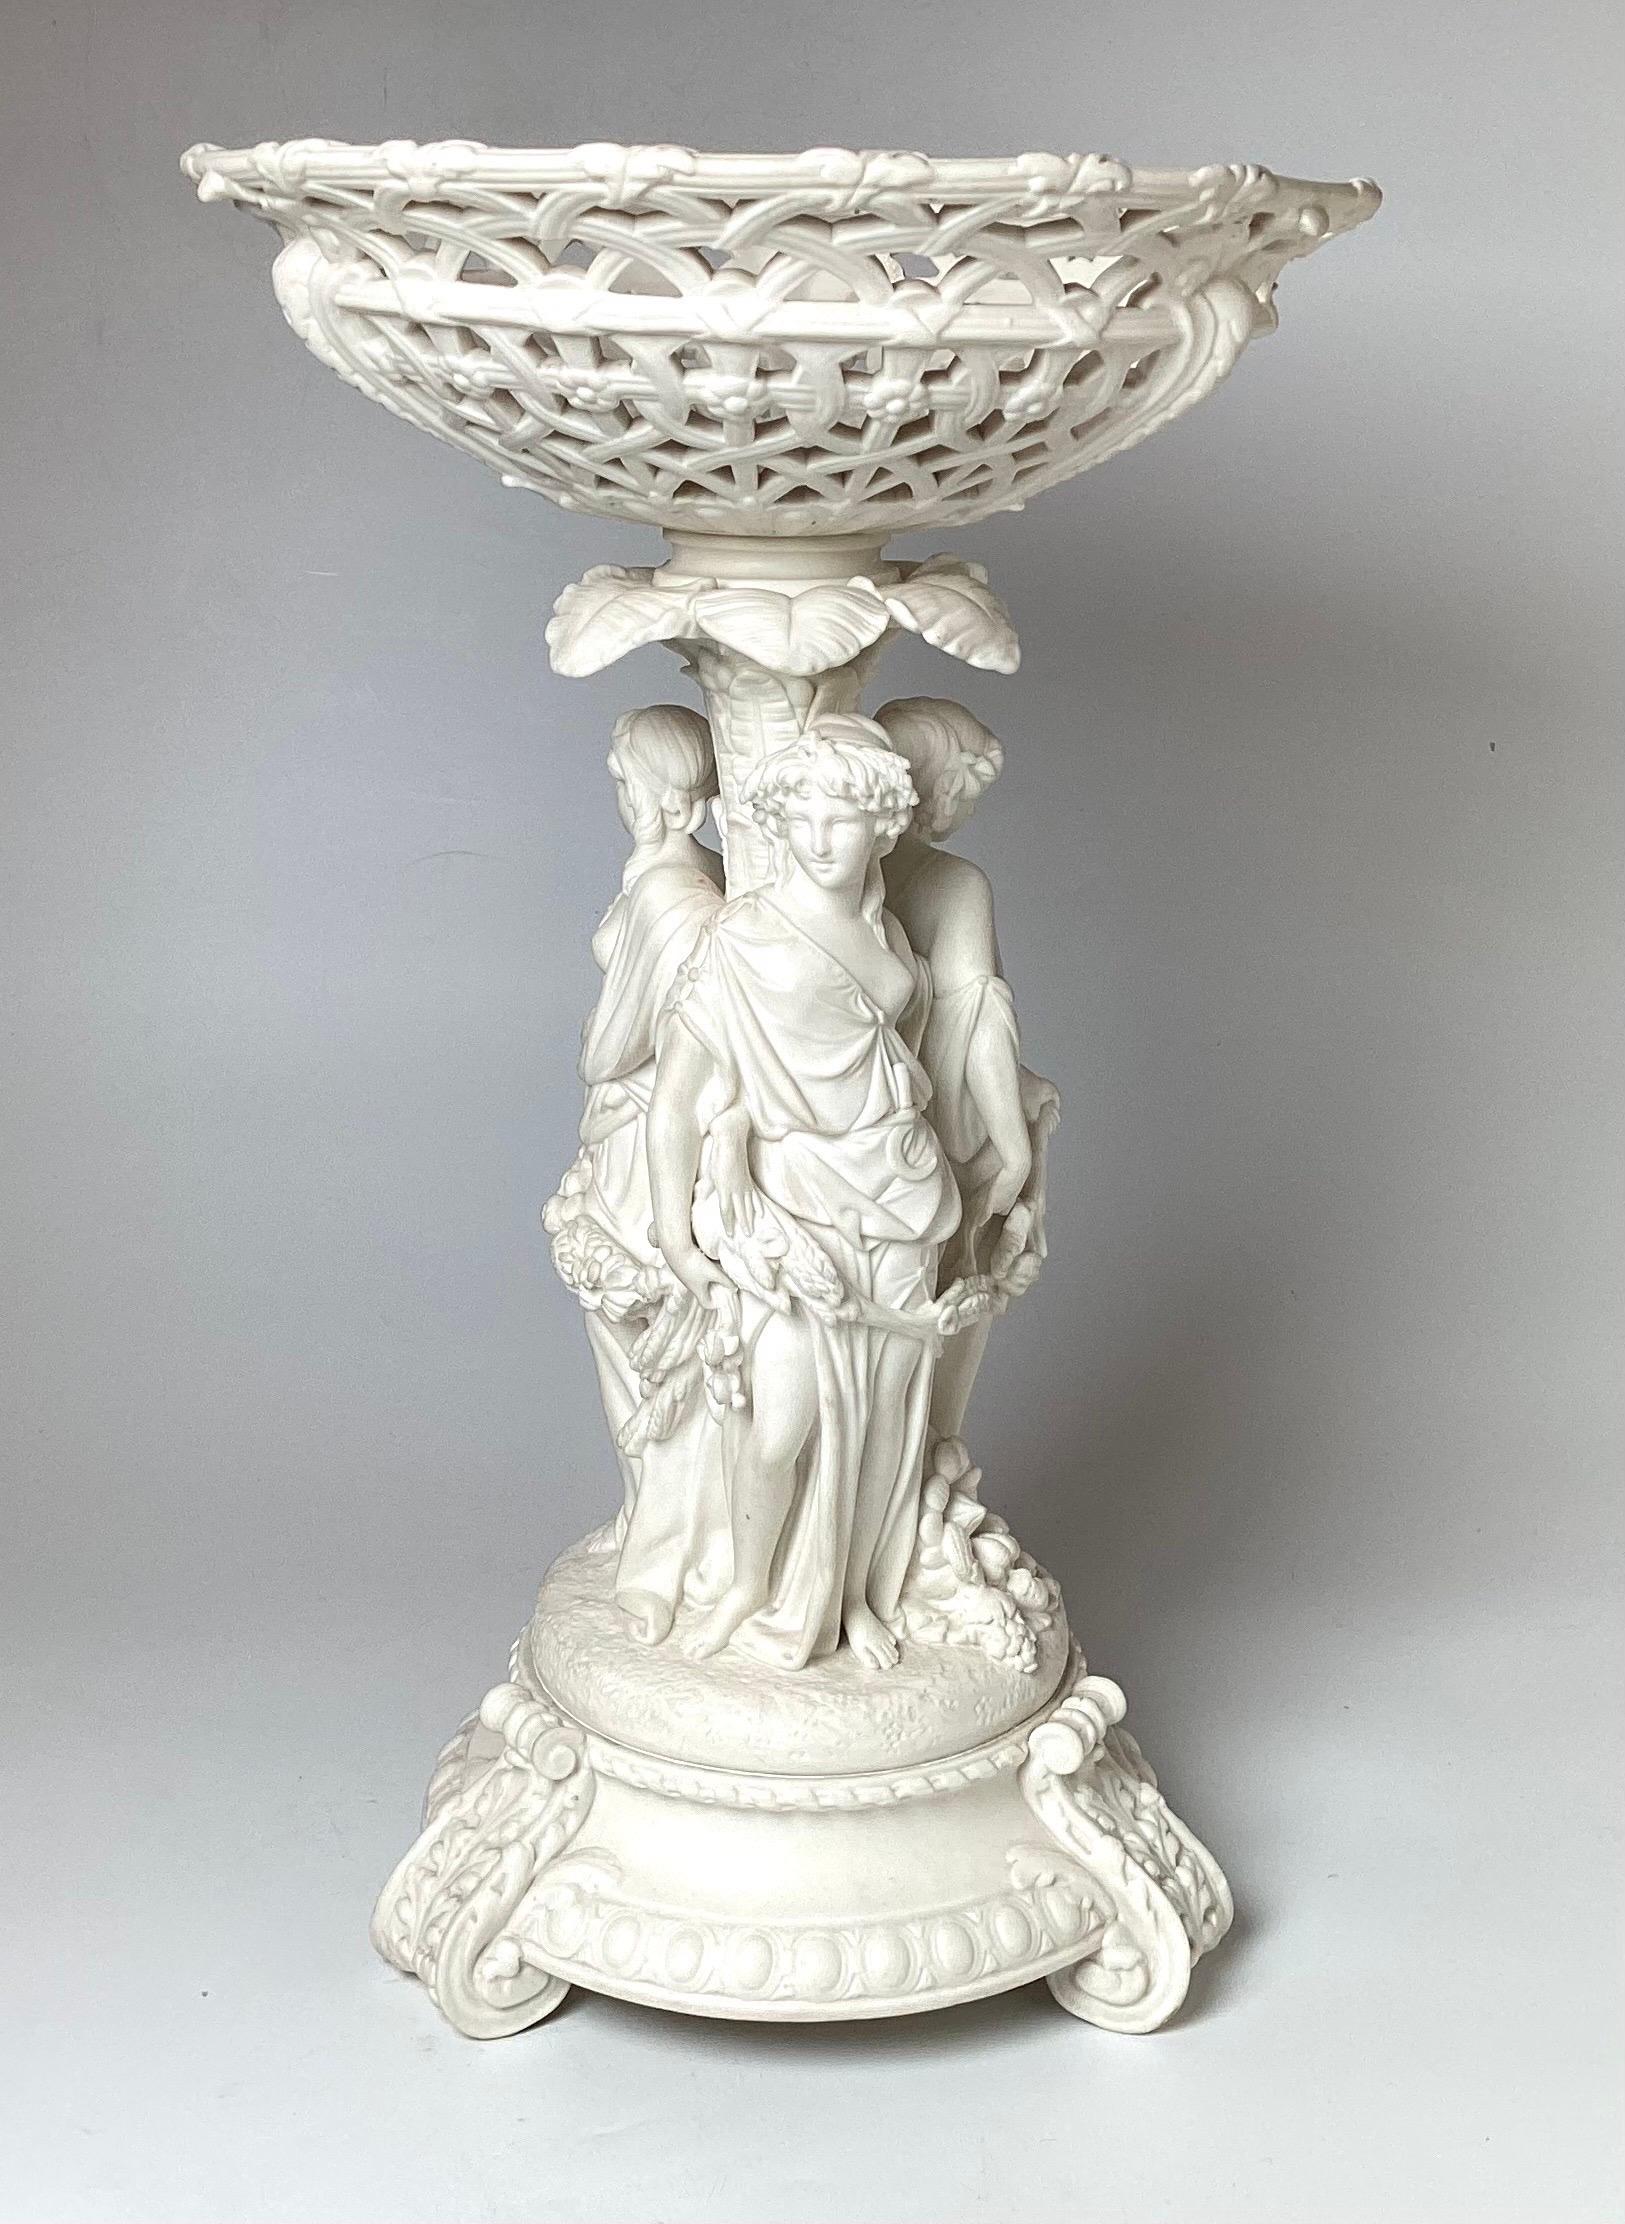 Elegant English porcelain bisque tall pedestal center bowl depicting the tree graces.  The reticulated bowl with the center of the three graces on a round footed base.  Attributed to Minton.